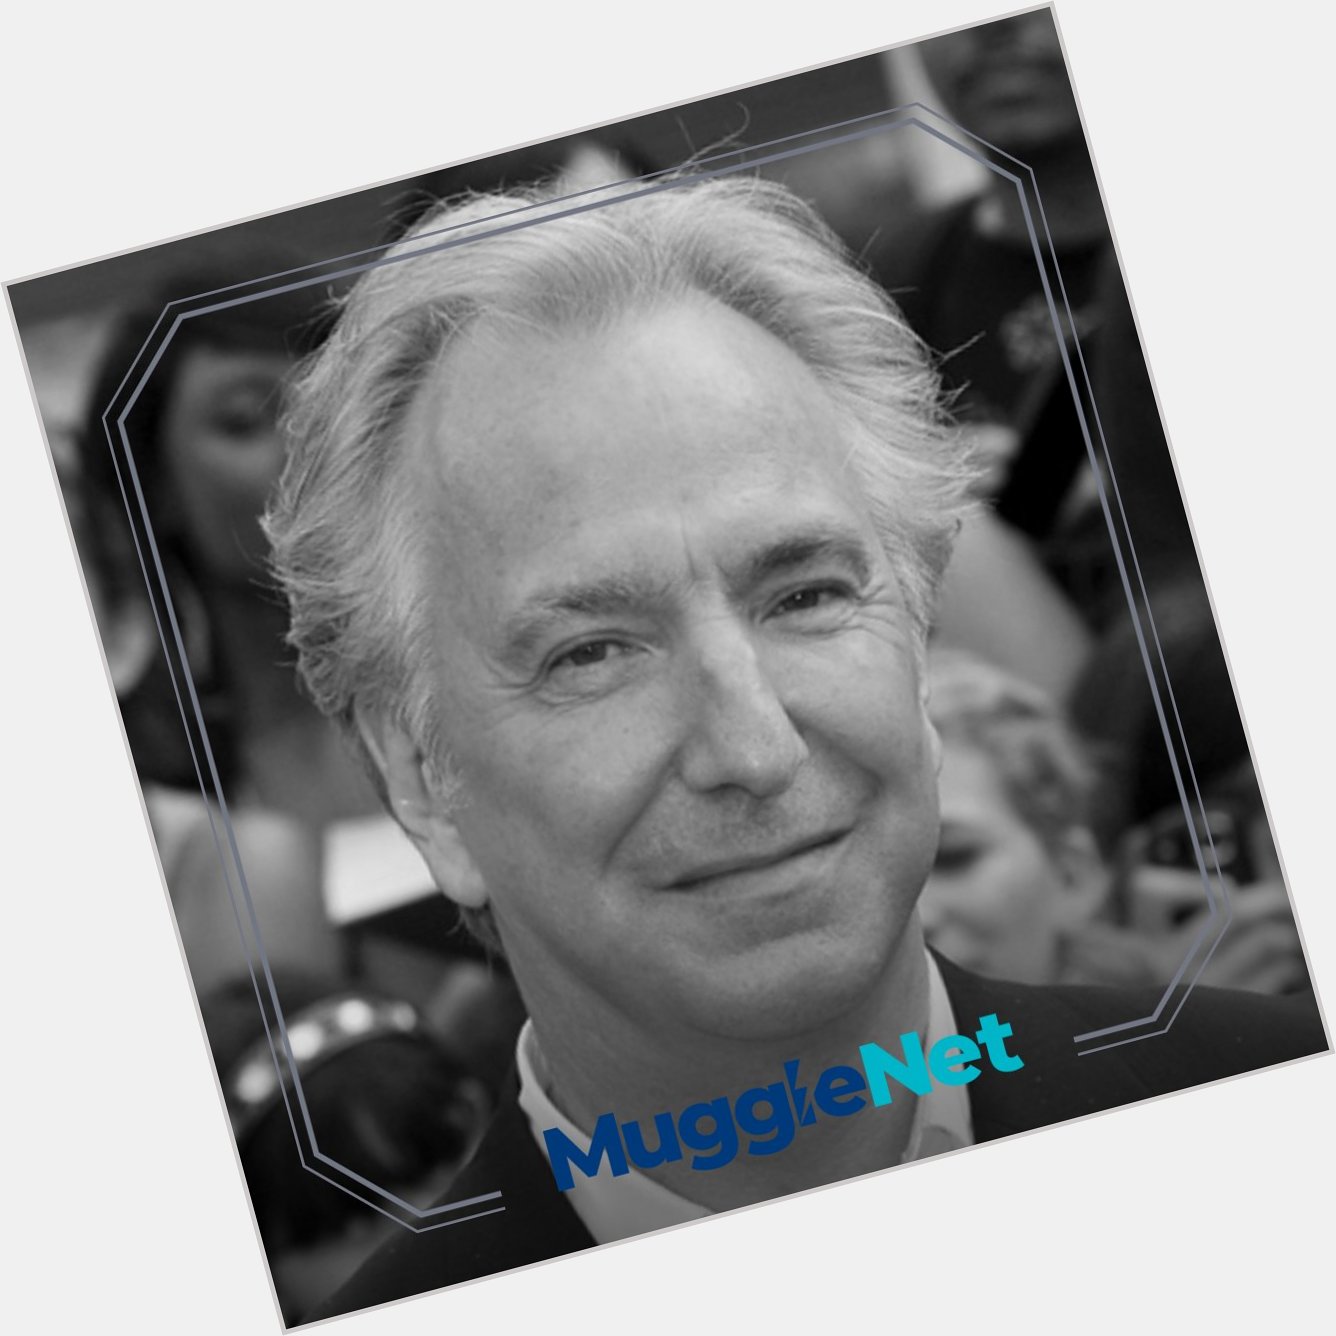 Happy birthday to the late Alan Rickman, who played Severus Snape in the films. 